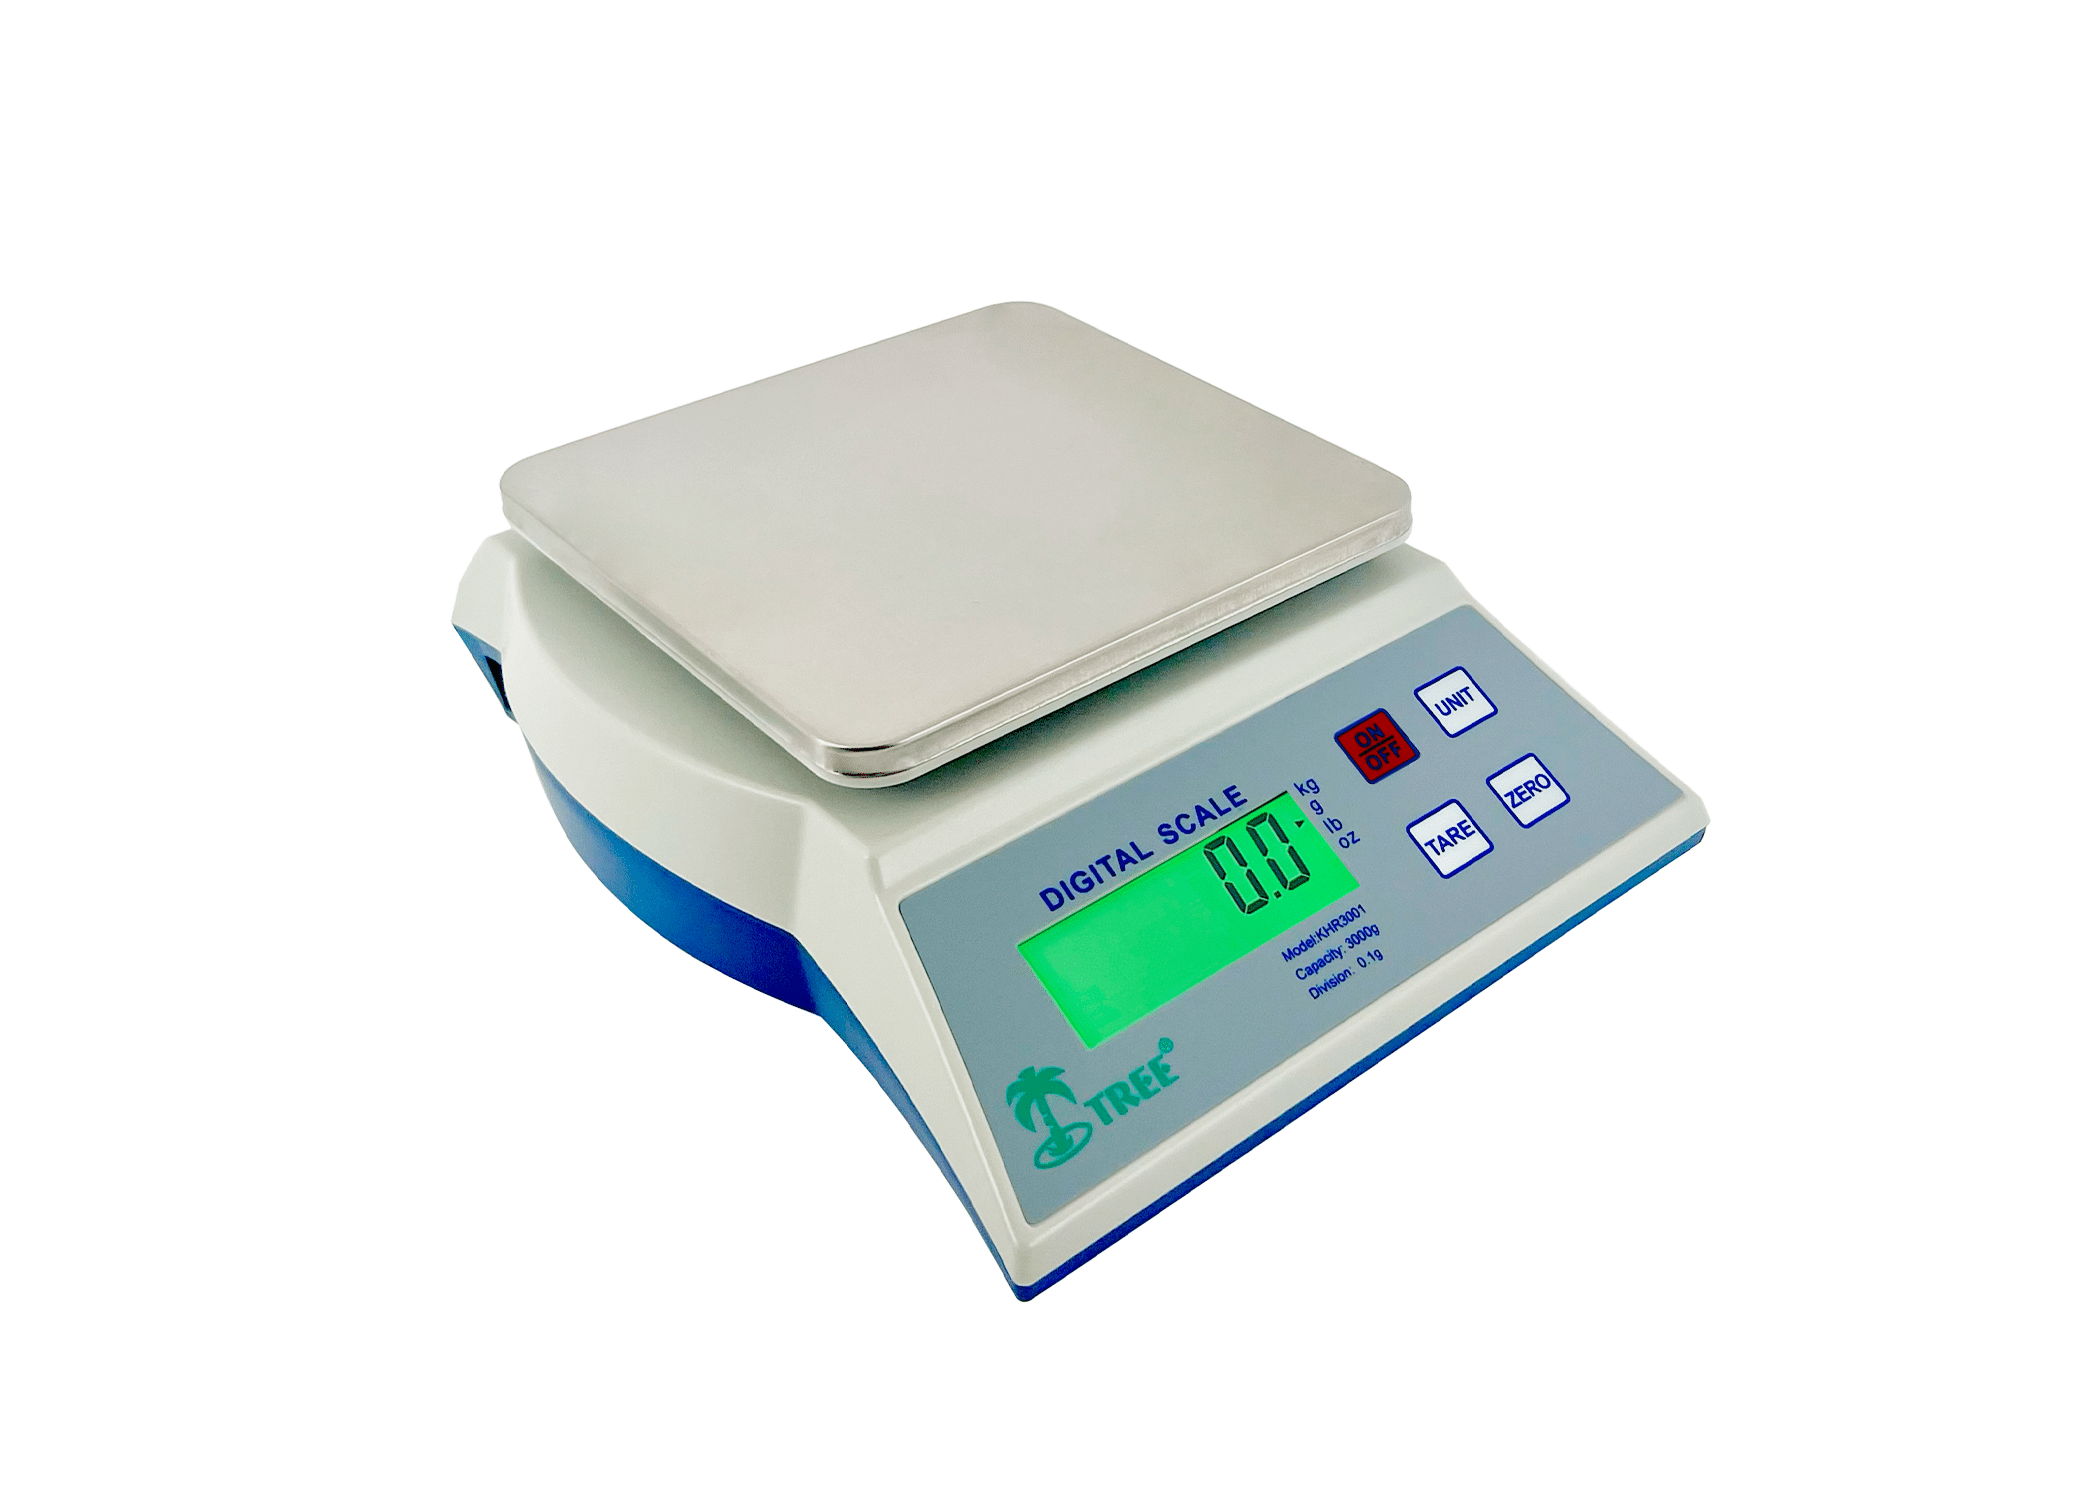 Digital Kitchen Food Cooking Scale Weight Balance in Pounds, Grams,  Ounces,& KG